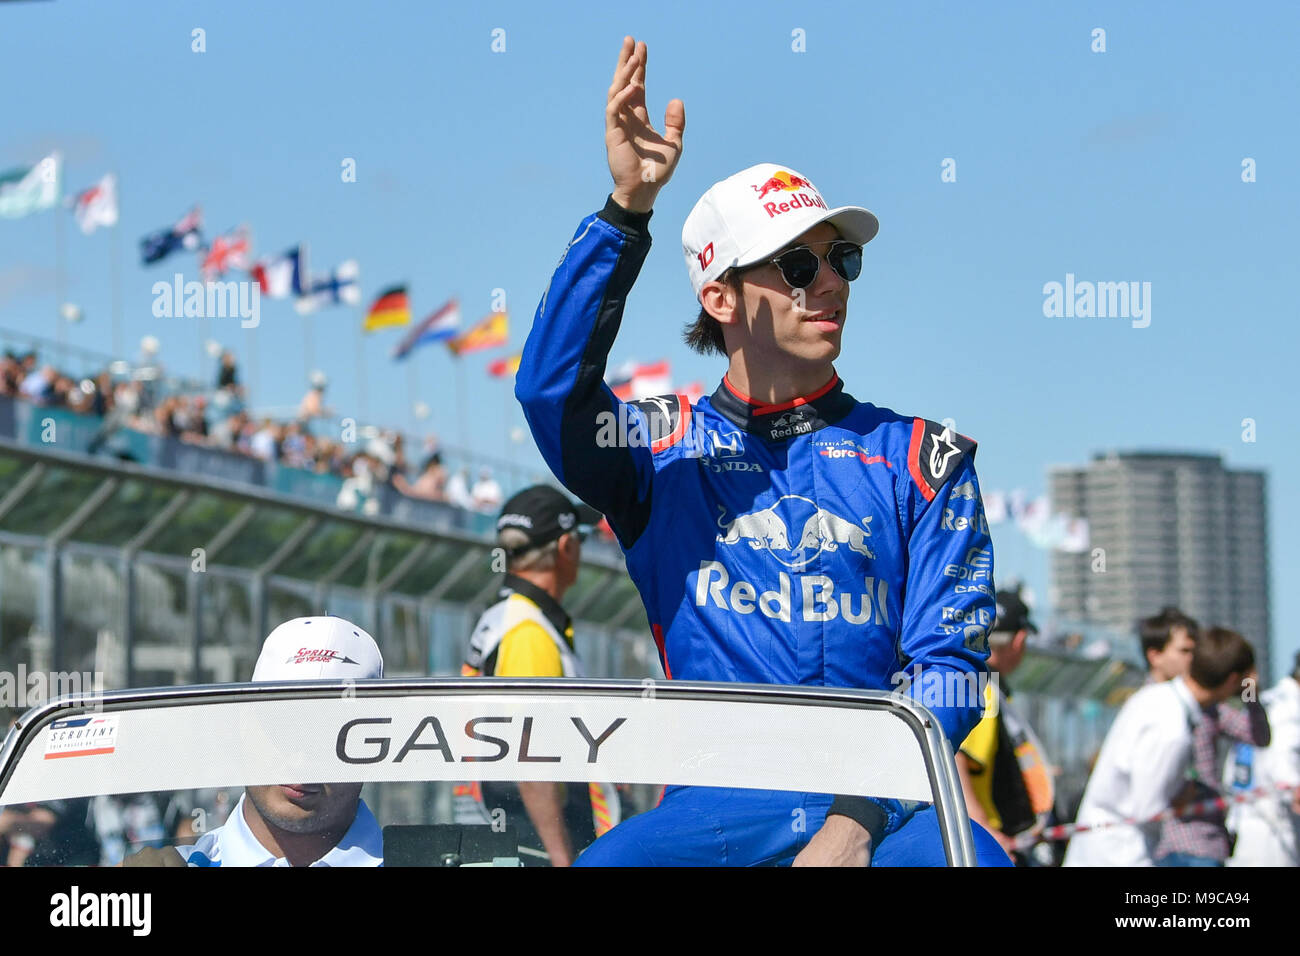 Albert Park, Melbourne, Australia. 25th Mar, 2018. Pierre Gasly (FRA) #10 from the Red Bull Toro Rosso Honda team waves to the crowd during the drivers' parade at the 2018 Australian Formula One Grand Prix at Albert Park, Melbourne, Australia. Sydney Low/Cal Sport Media/Alamy Live News Stock Photo